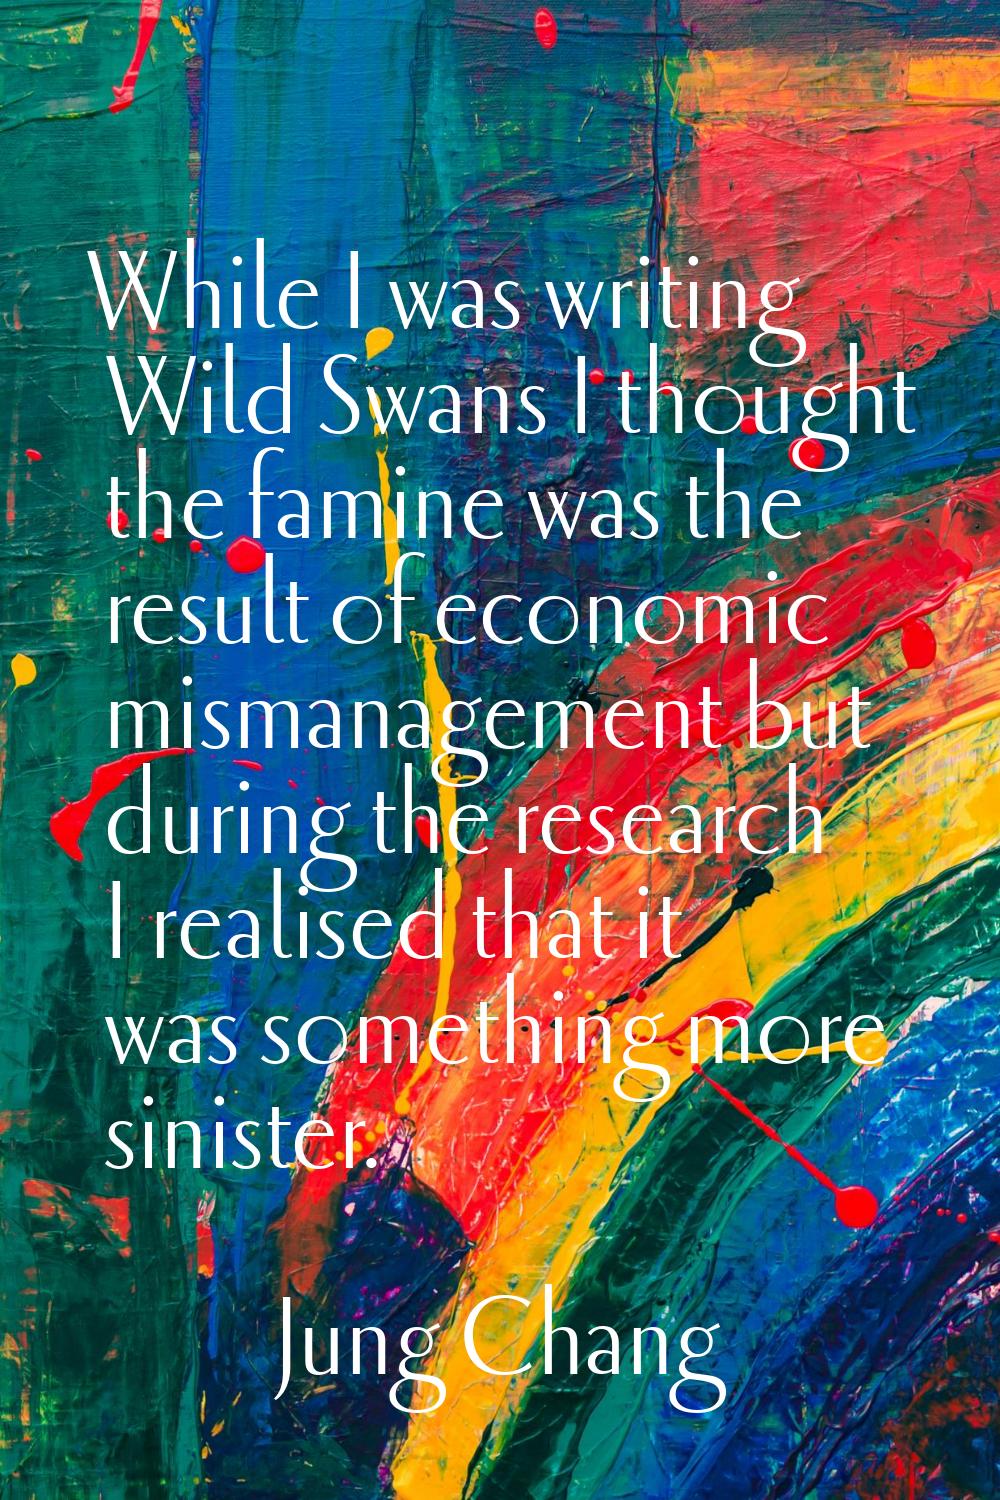 While I was writing Wild Swans I thought the famine was the result of economic mismanagement but du